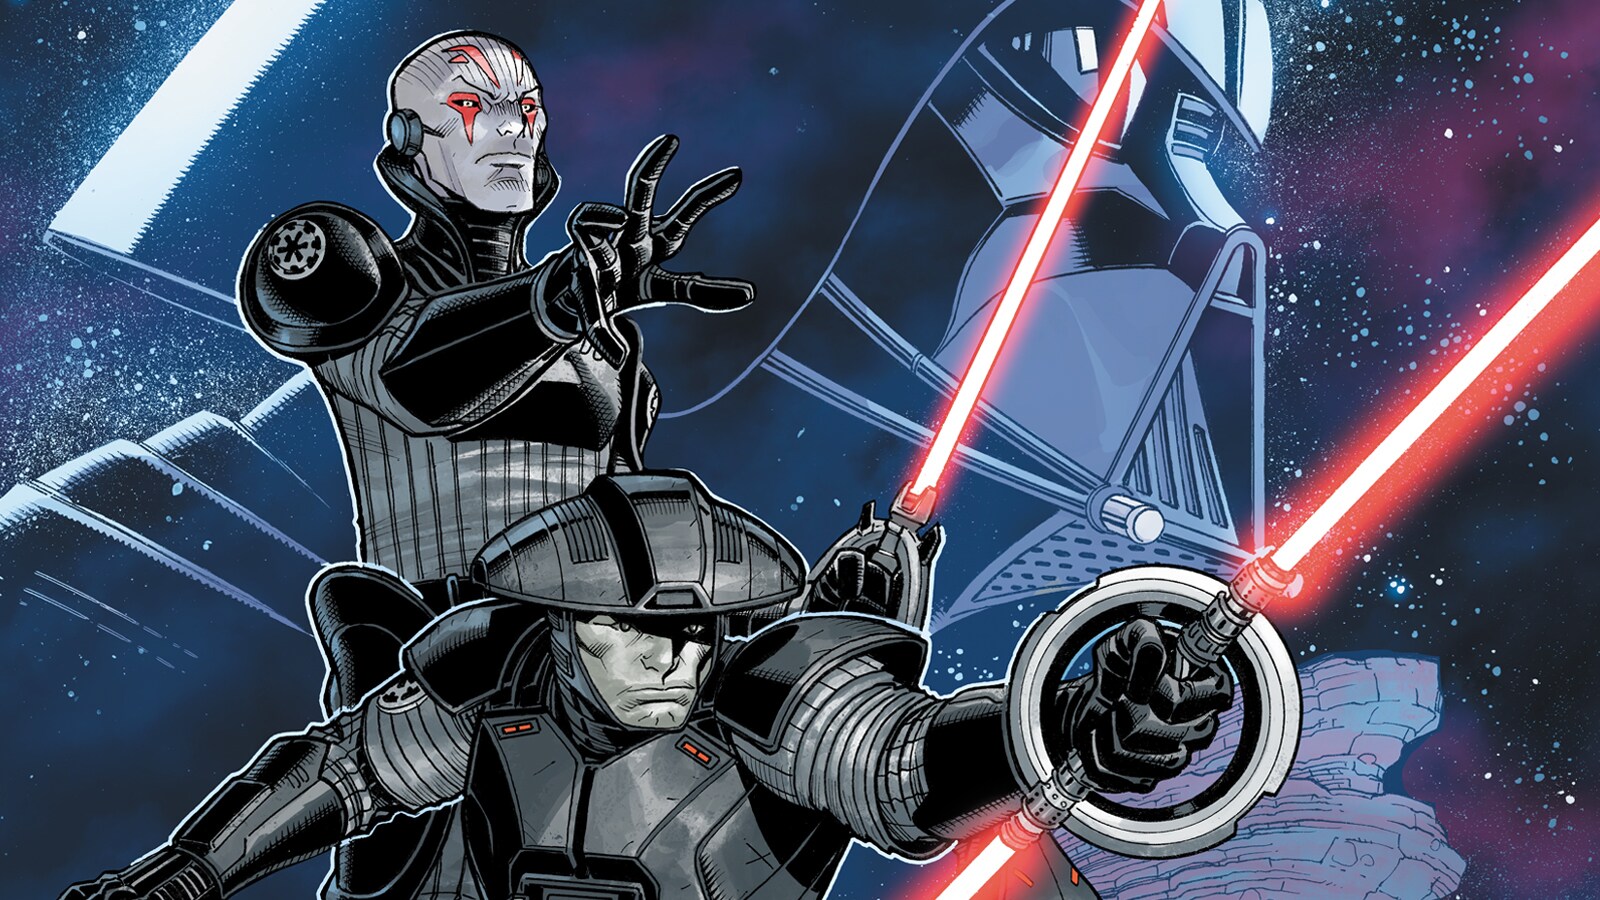 The Hunt for Jedi Is on in Marvel’s Star Wars: Inquisitors - Exclusive Reveal